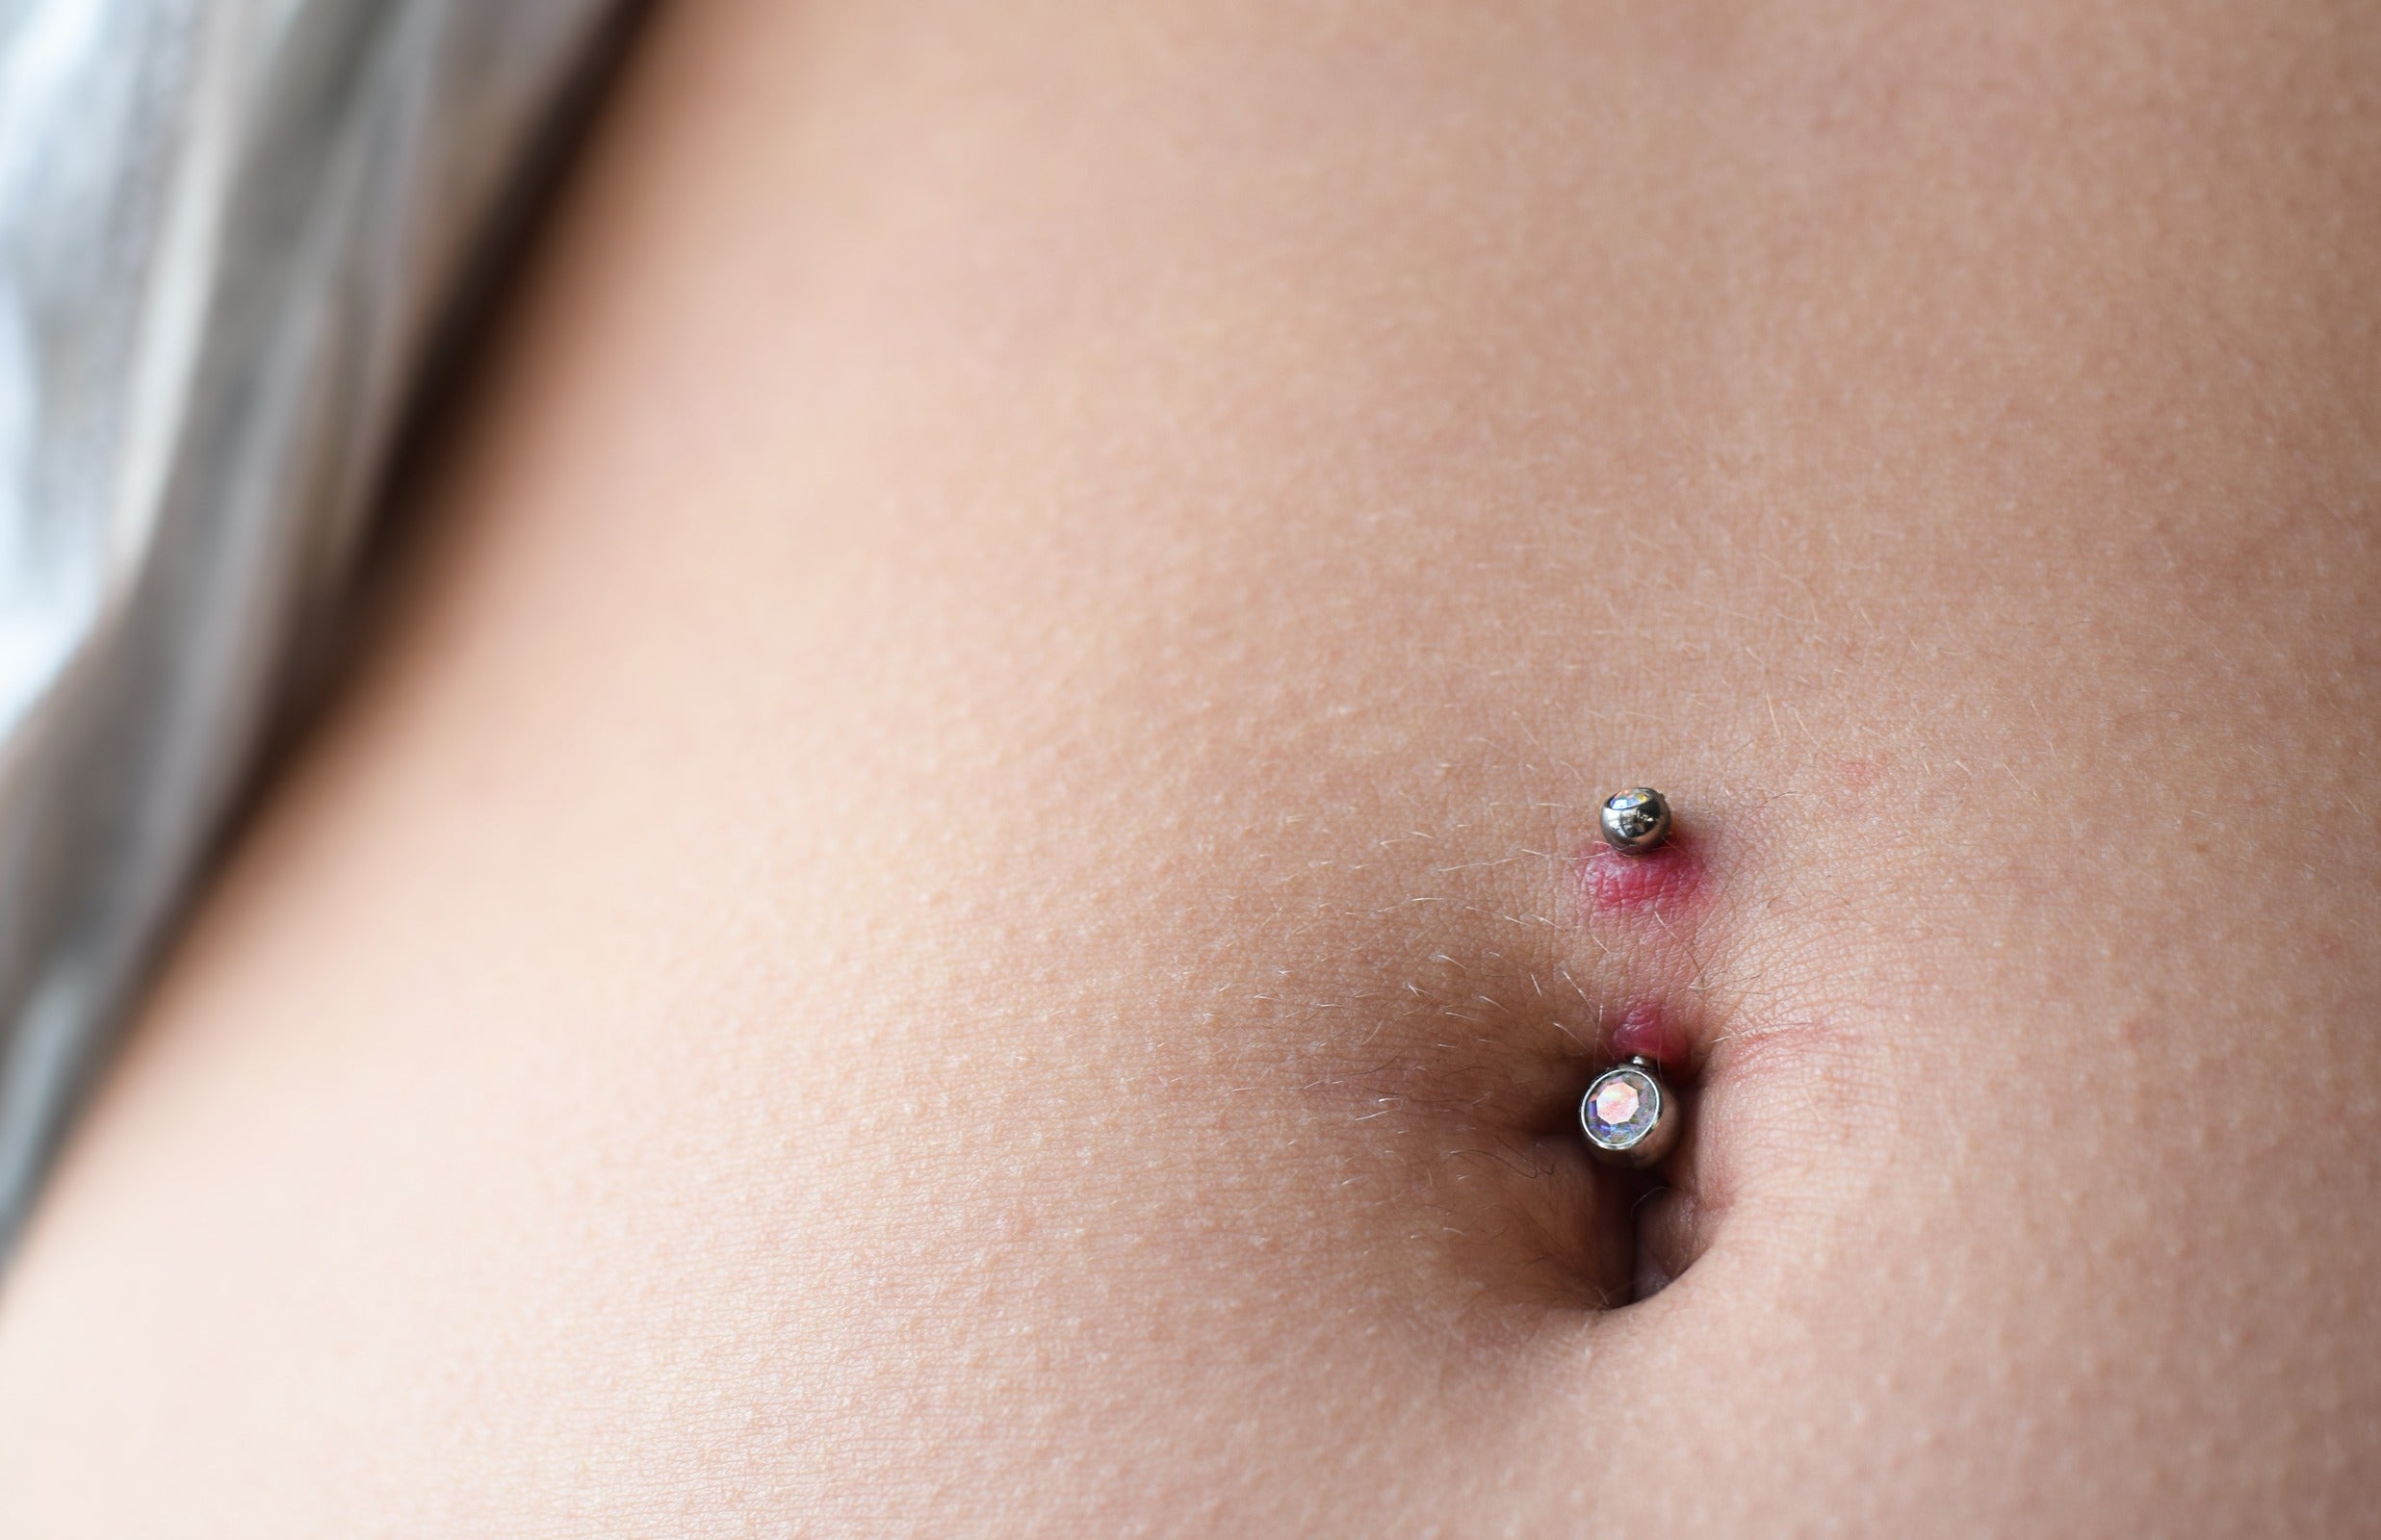 Reasons for removing belly button piercings